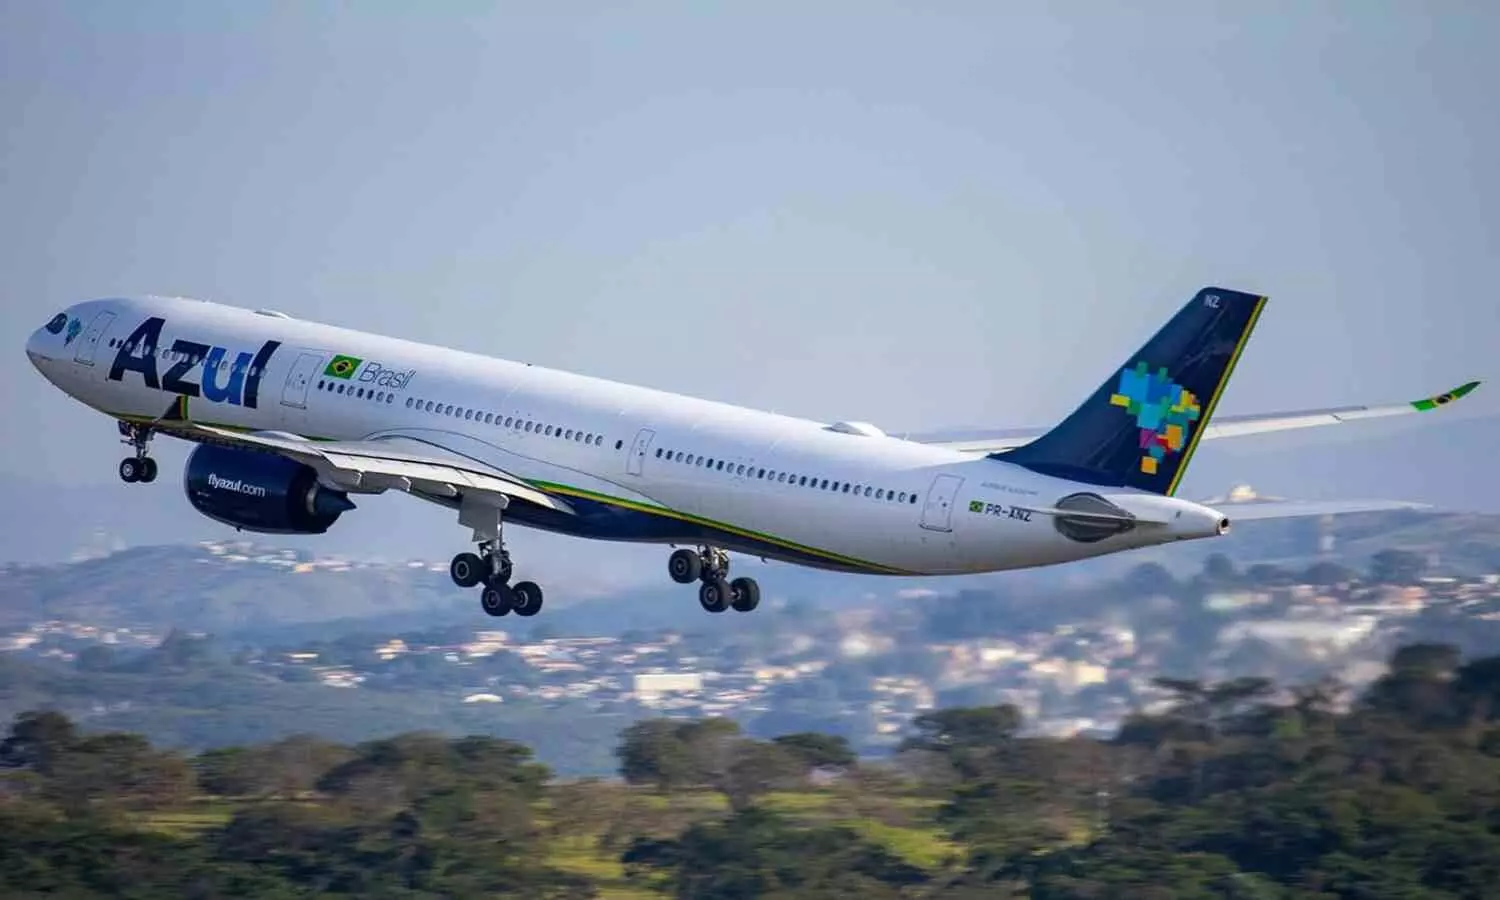 GSSA also plans to develop the airline’s business from offline U.S. destinations with dedicated Azul sales representatives